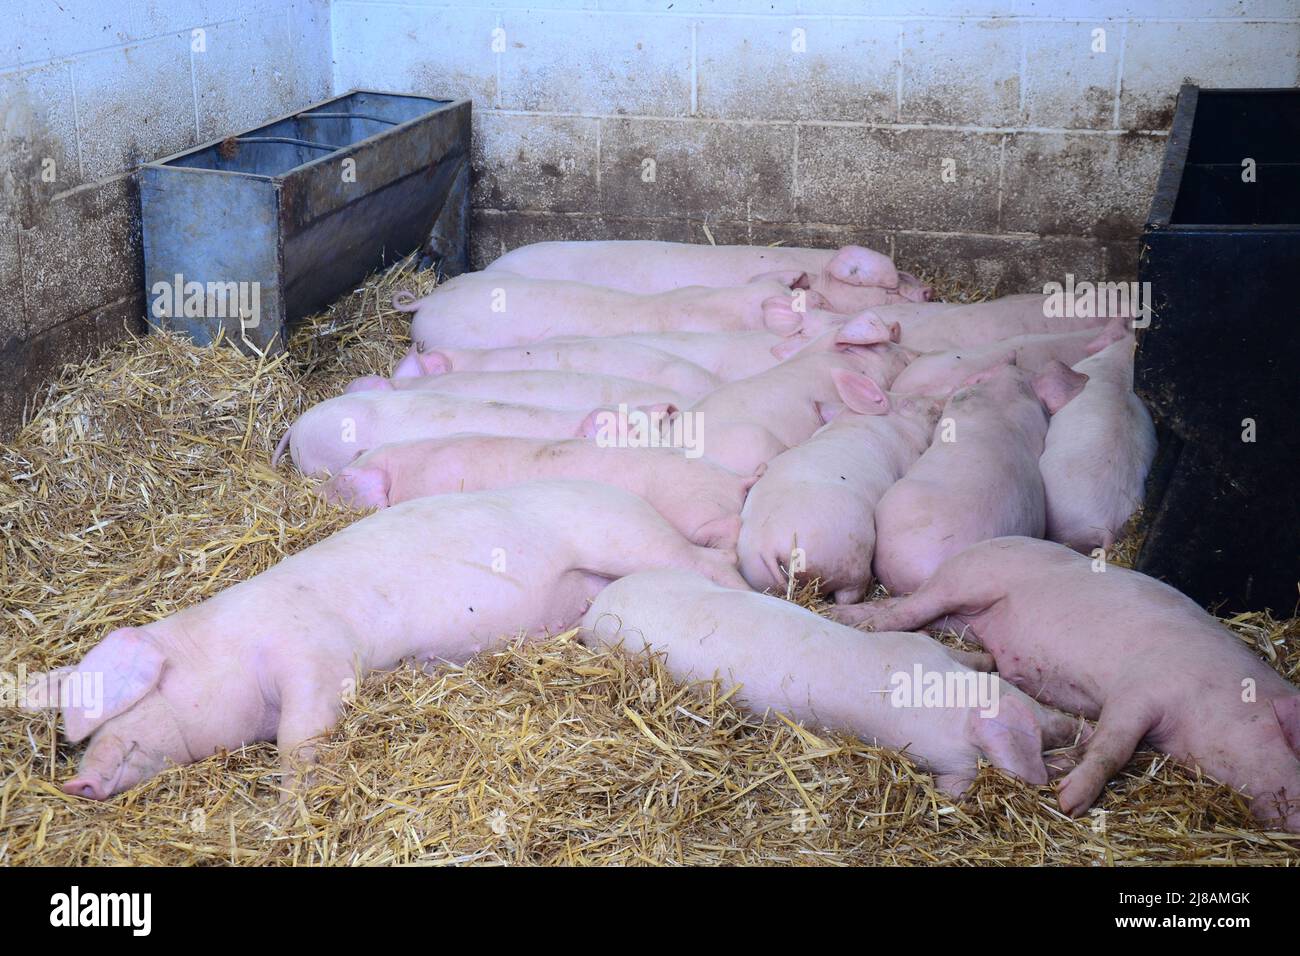 Manchester, UK, 14th May, 2022. Pigs sleep at Wythenshawe Community Farm, Manchester, UK. The National Pig Association (NPA) said in May that 80% of UK pig producers could go out of business within a year unless Tesco pays more for its pork. In an open letter to Tesco on 5th May, Rob Mutimer, NPA chairman, accused Tesco of 'continued inaction'. The NPA said other supermarkets had agreed more support for farmers, when costs are increasing. The media reported that Tesco said it 'would like to do more' and was 'working with our suppliers'. Credit: Terry Waller/Alamy Live News Stock Photo